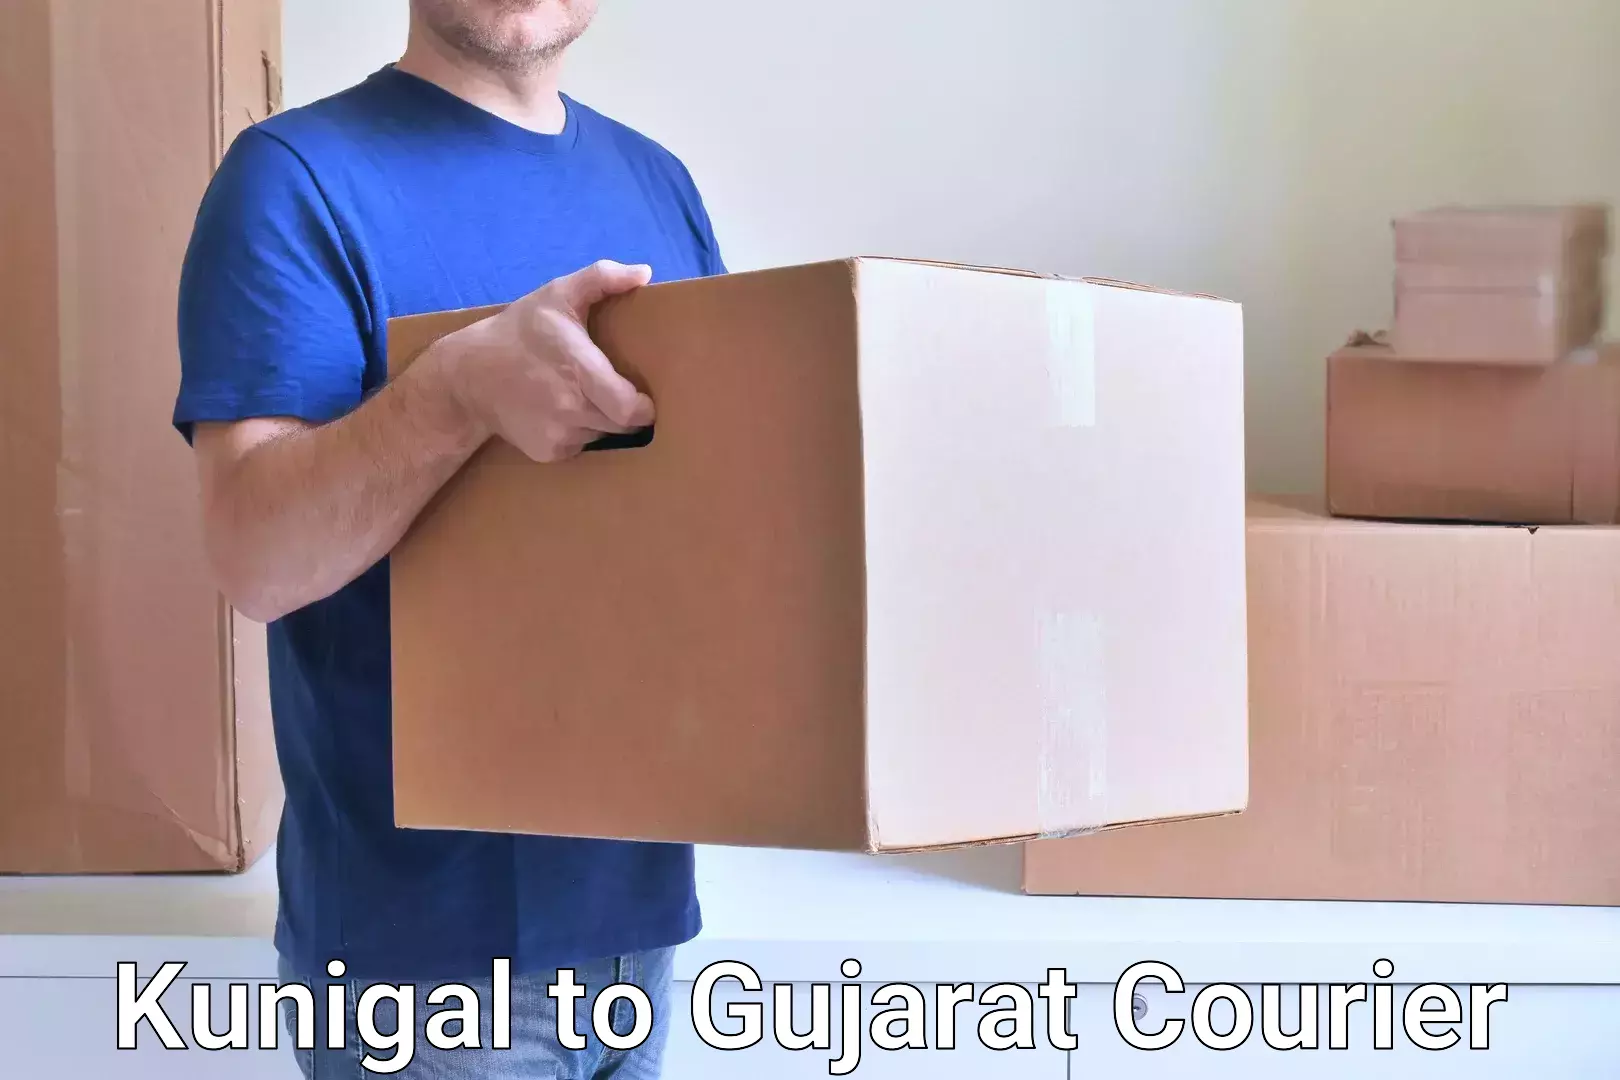 Multi-national courier services Kunigal to Surat